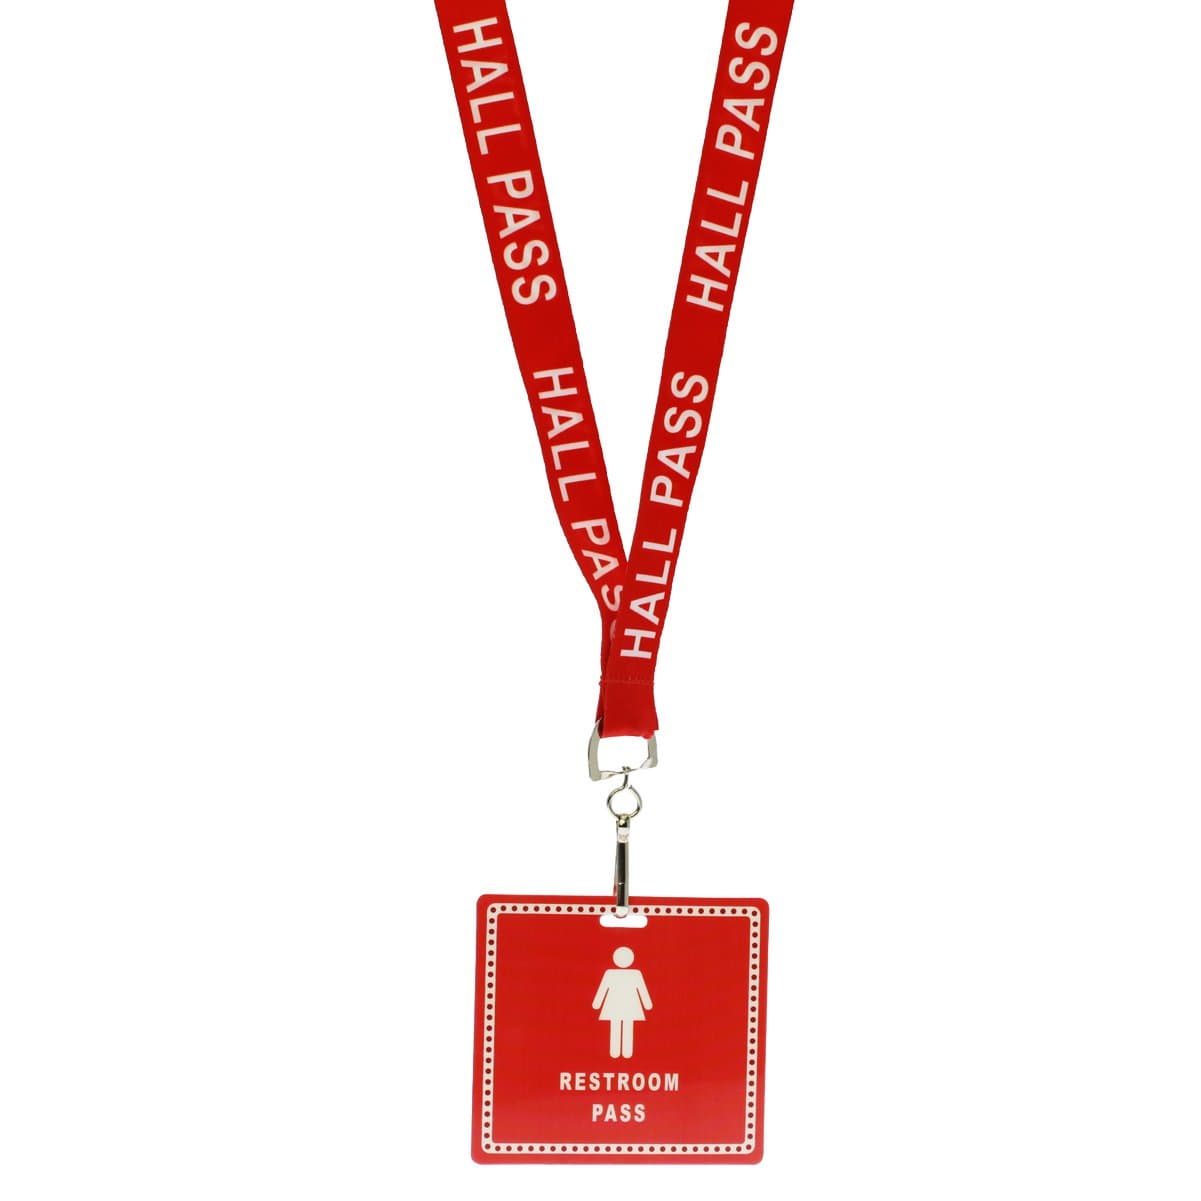 Assorted School Hall Pass Lanyards WITH UNBREAKABLE CARD PASSES - 6 Pack Set (SPID-9800) SPID-9800-ASSORTED-Q6